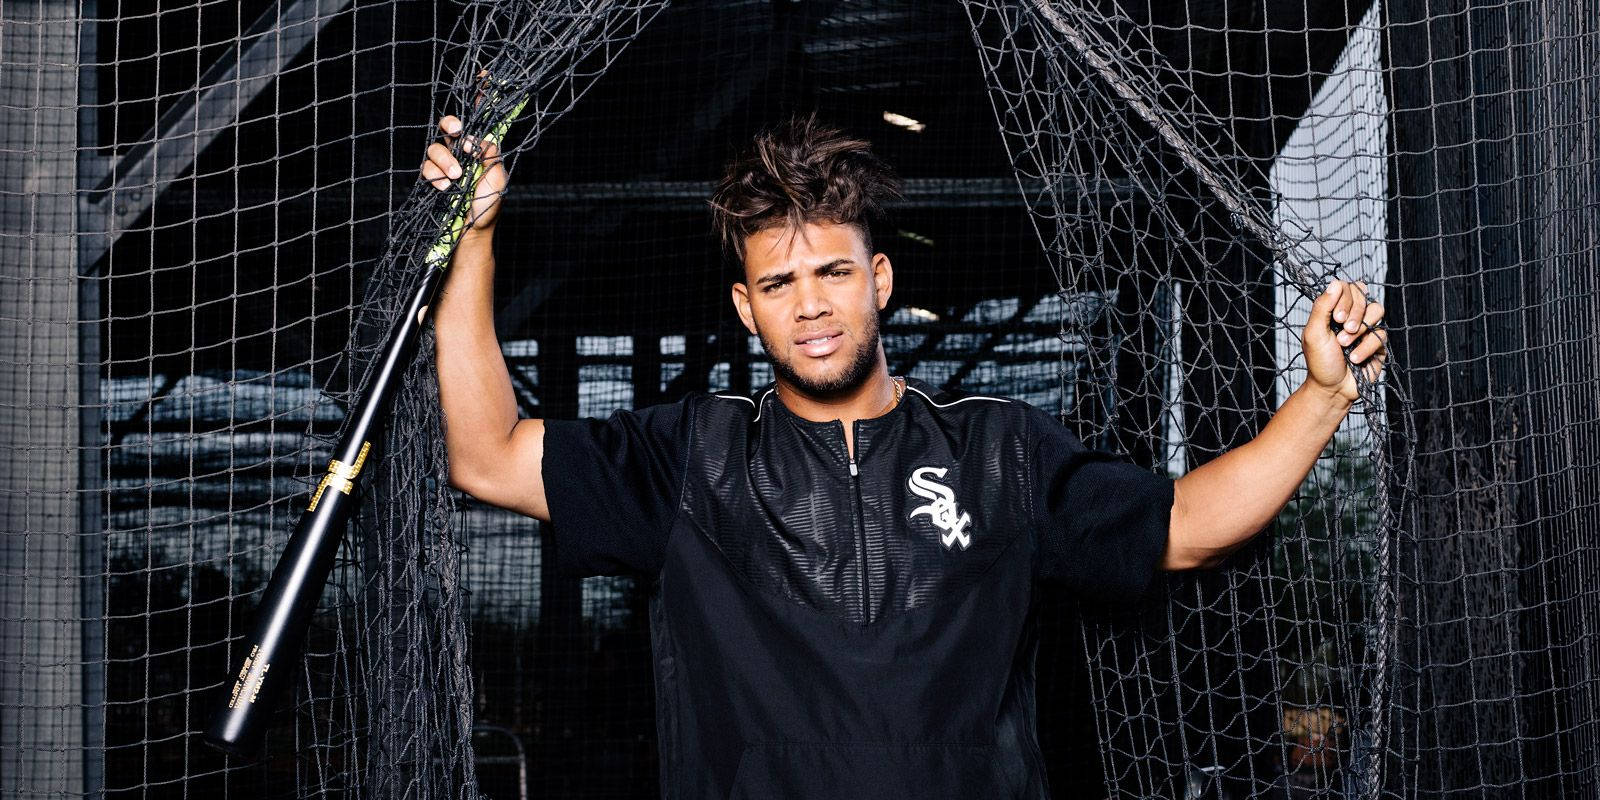 Yoanmoncada Poserar Med Nätet. (note: This Sentence Is Grammatically Correct Swedish But Does Not Make Much Sense Without More Context. Perhaps If You Provide More Context, I Could Translate It More Accurately.) Wallpaper